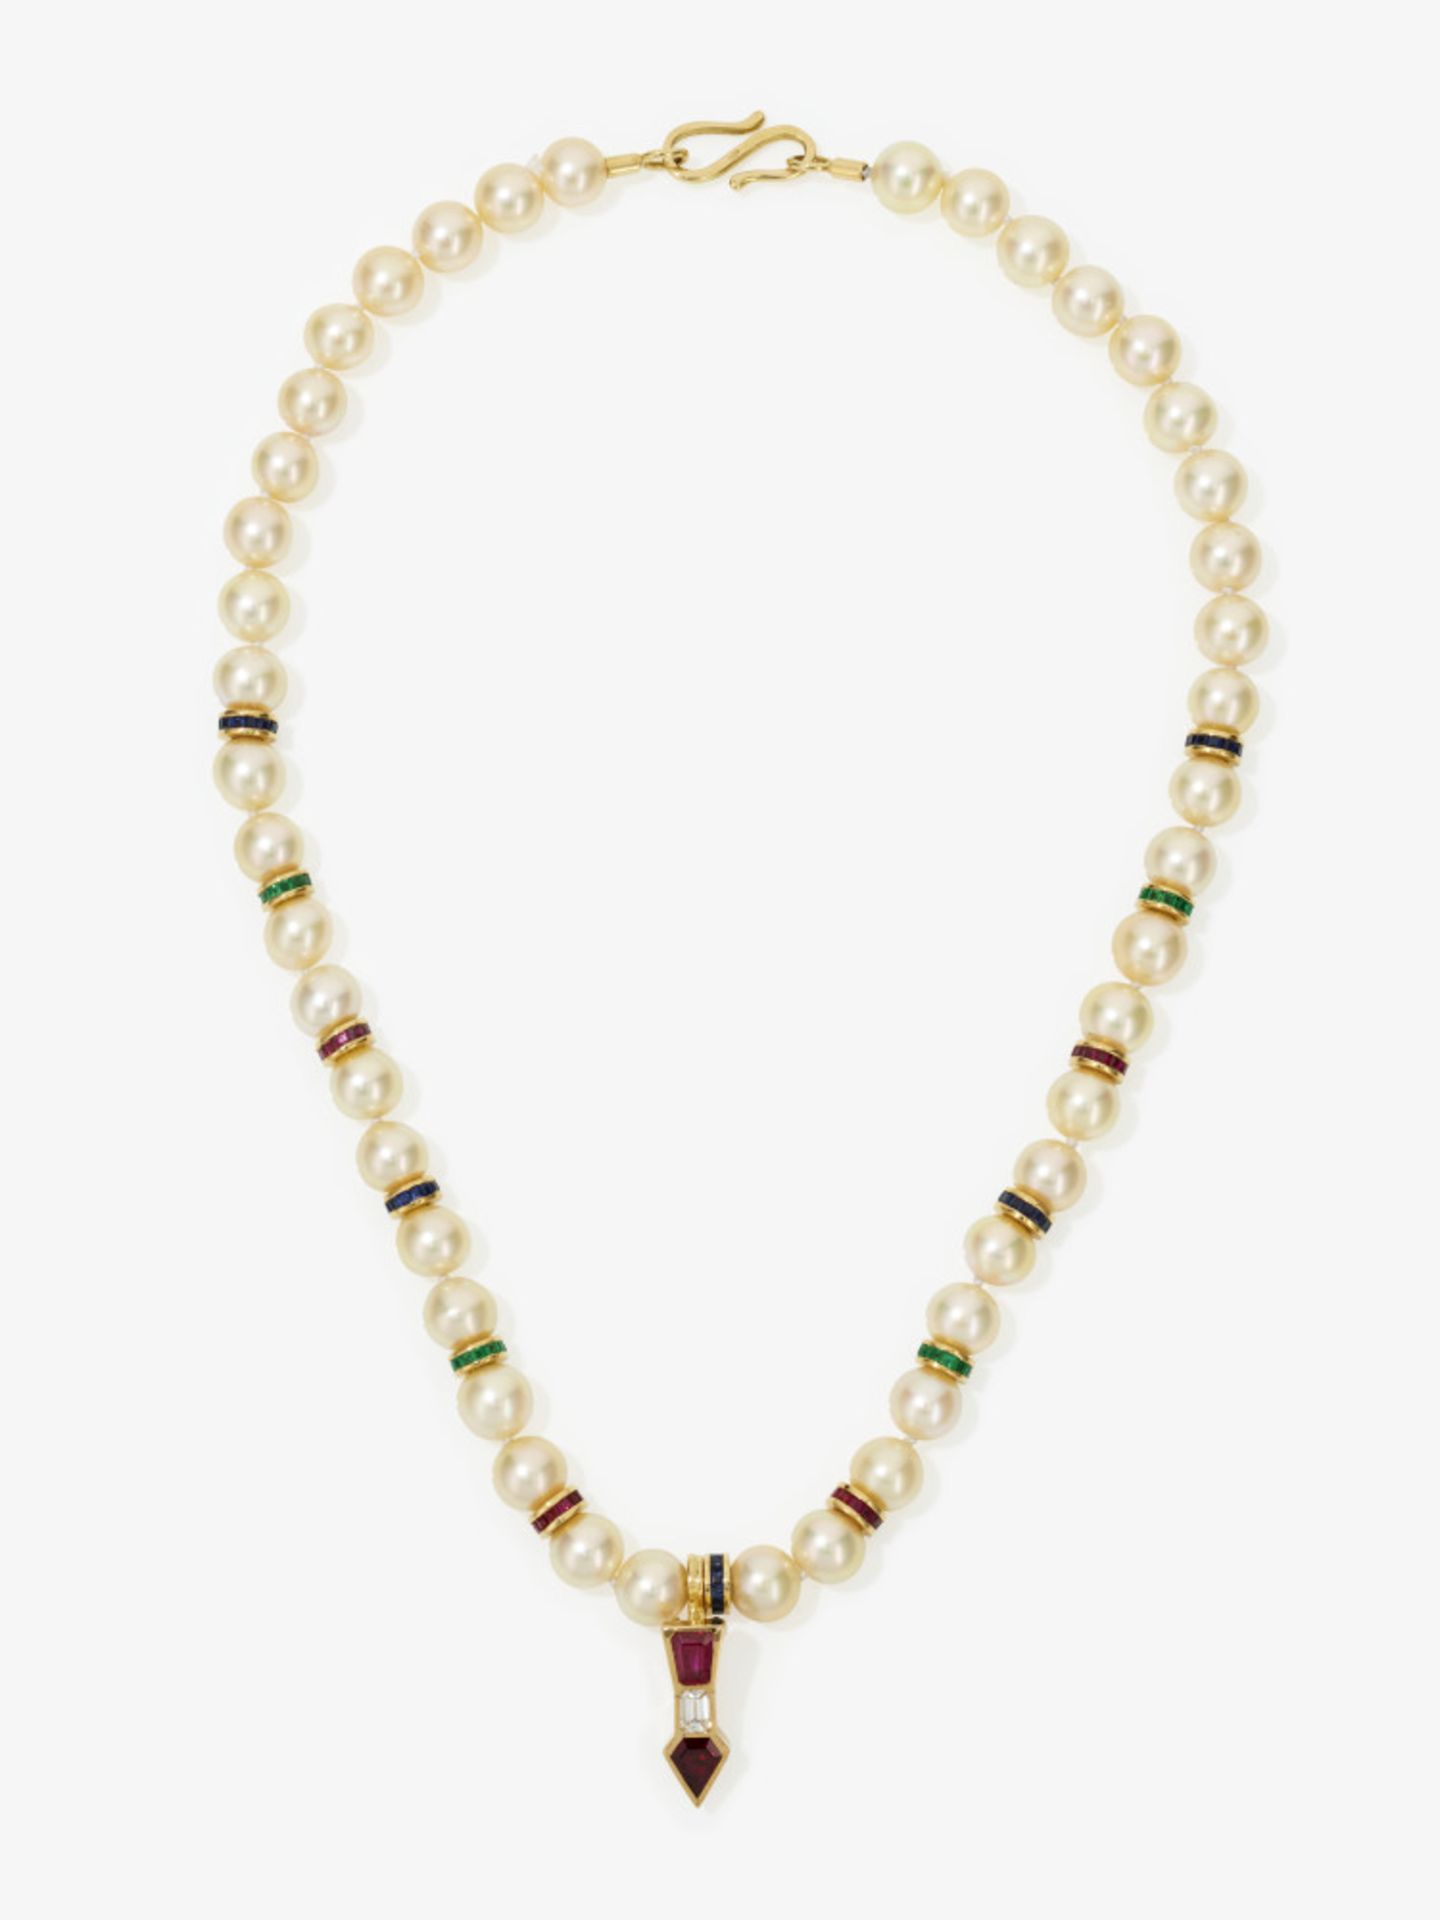 A cultured pearl necklace with a pendant with sapphires, emeralds, rubies and a diamond - Image 2 of 2